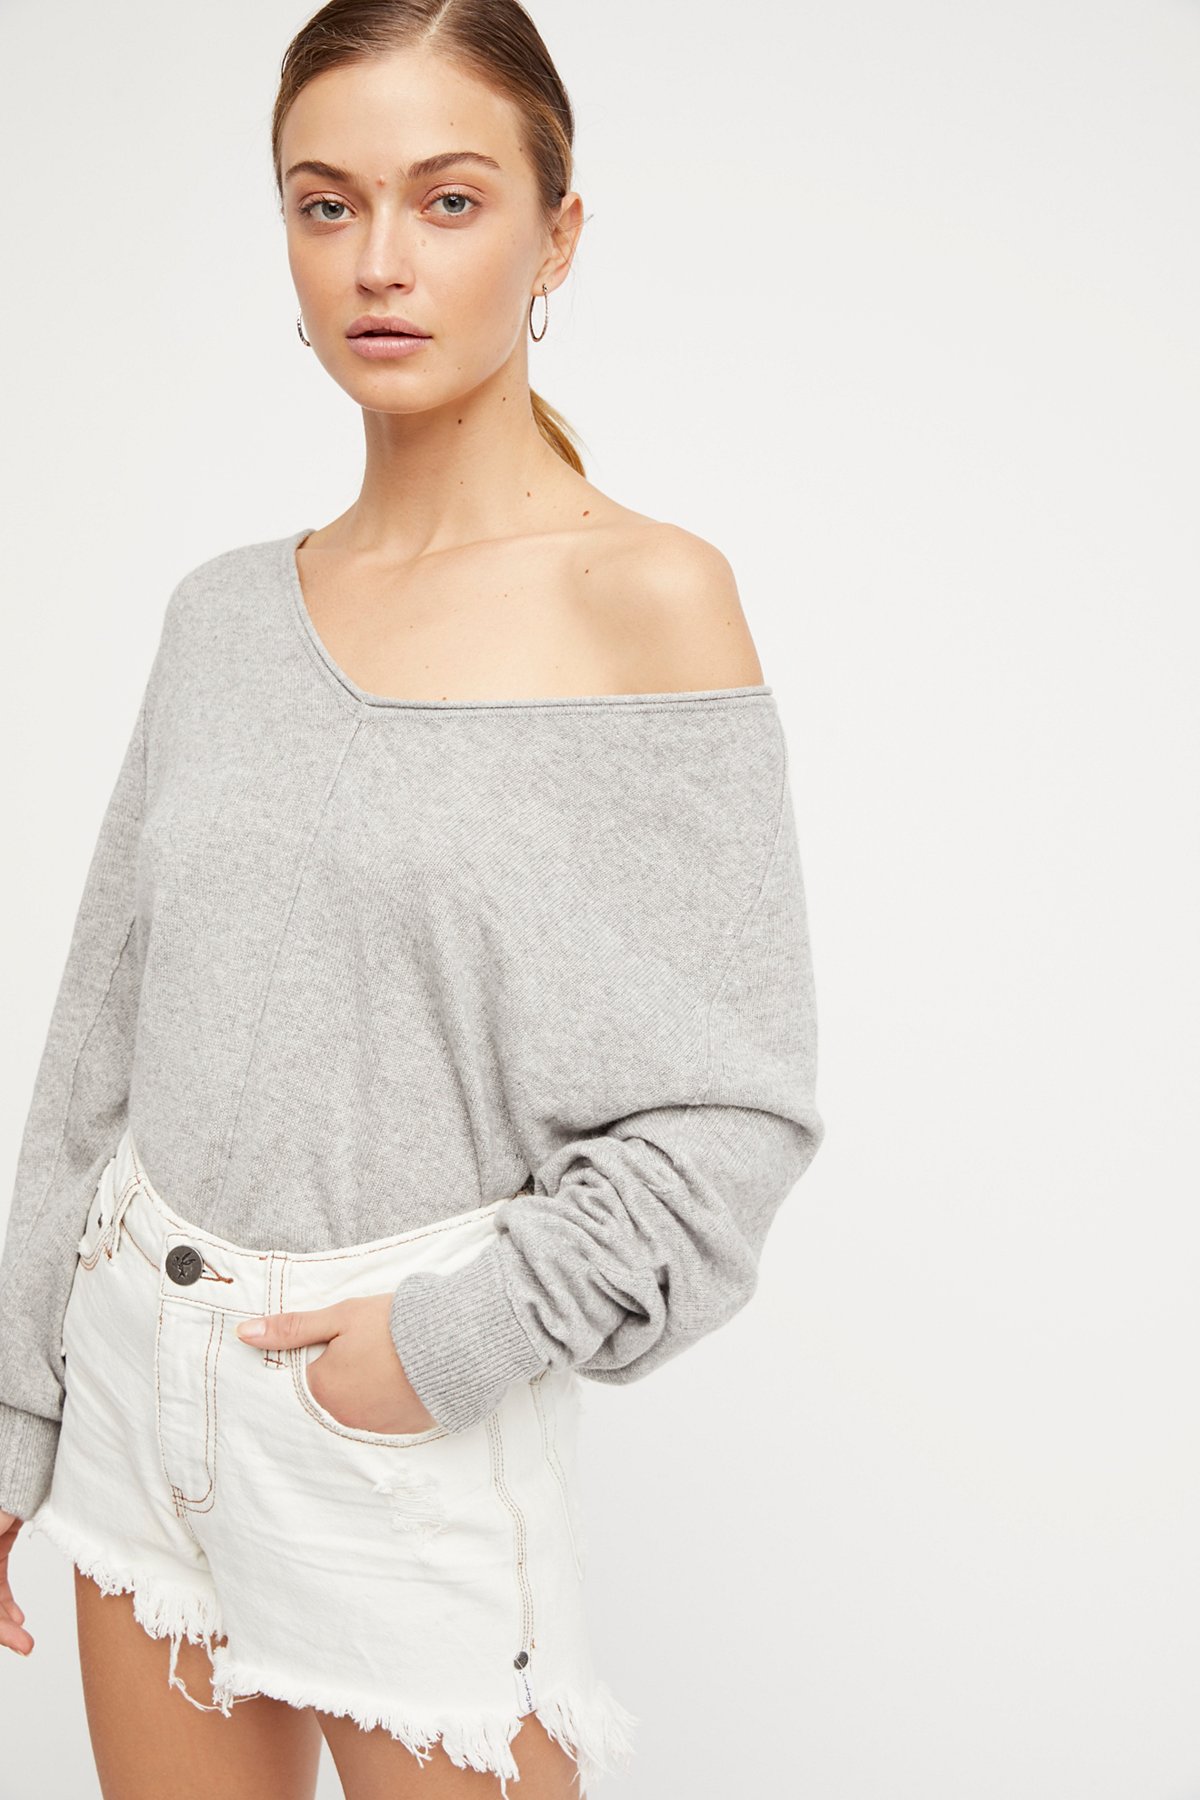 Lure Me In Cashmere Sweater at Free People Clothing Boutique